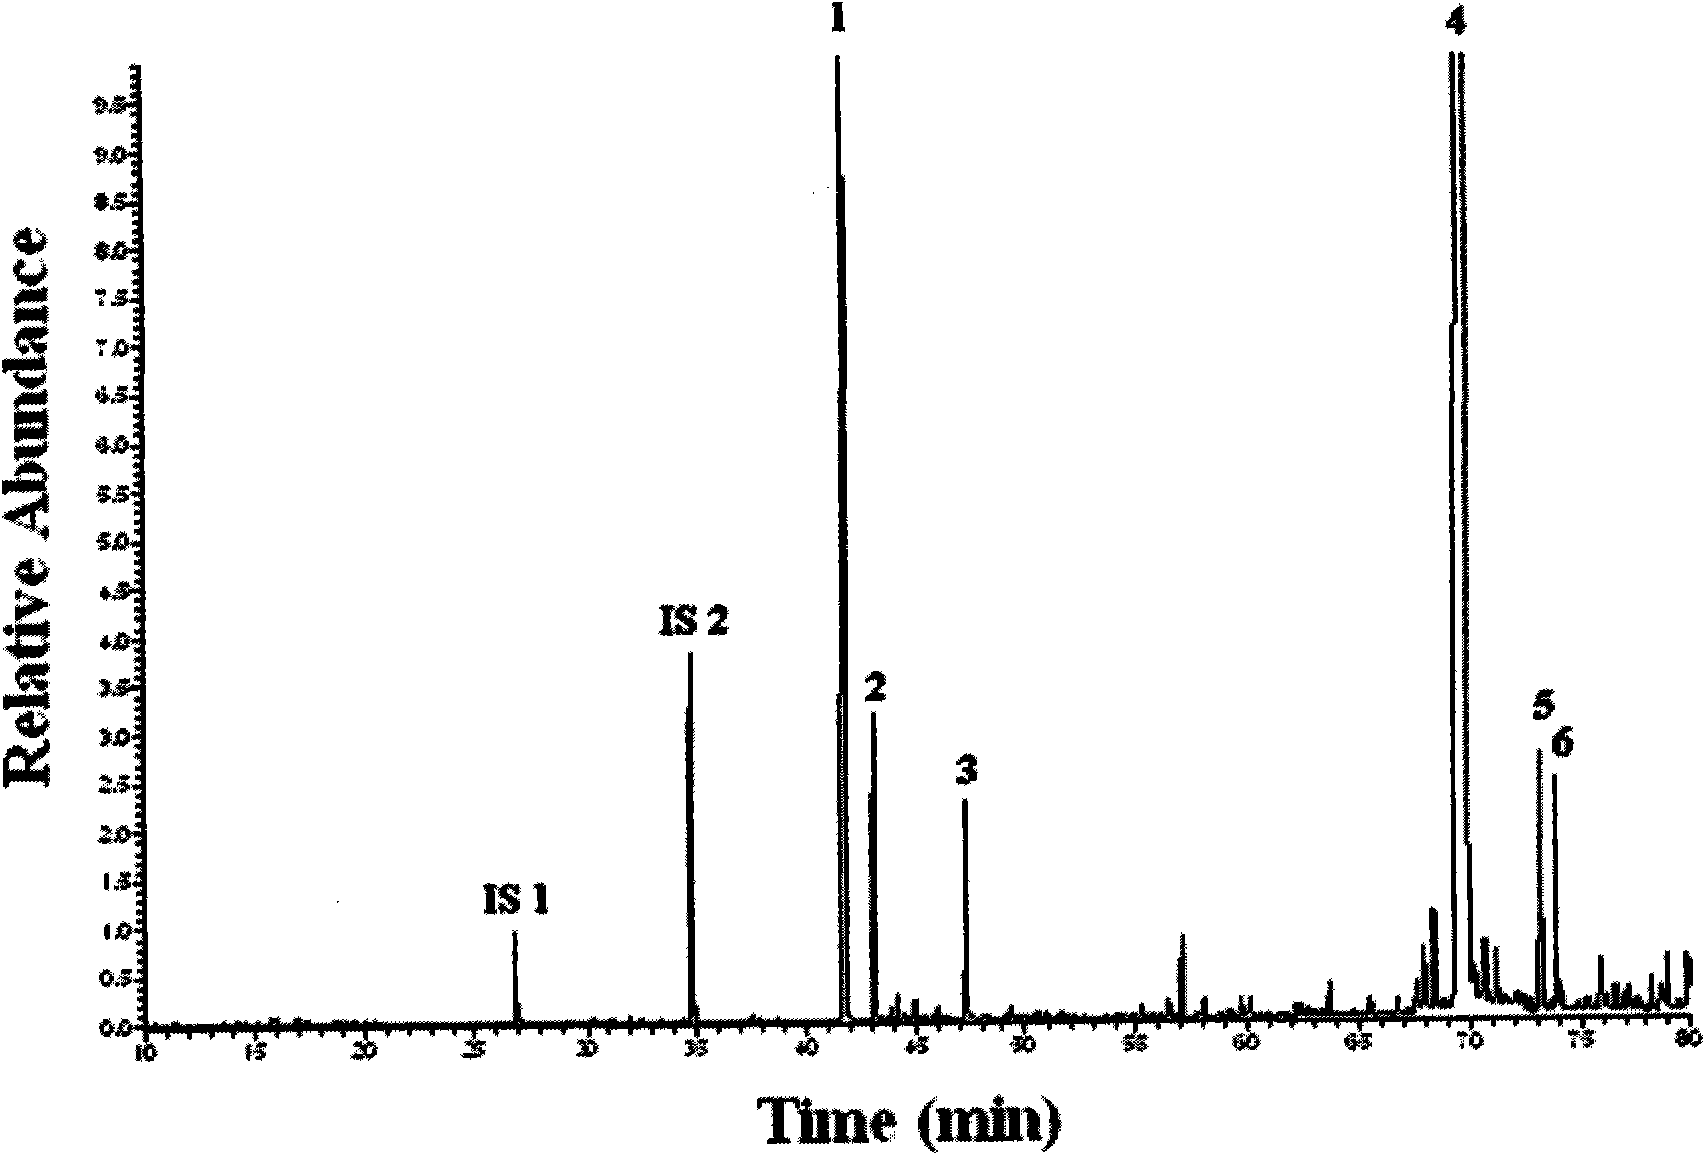 Method for separating and analyzing volatile and semi-volatile flavor components in tobacco by using liquid chromatography-gas chromatography/mass spectrometry technology